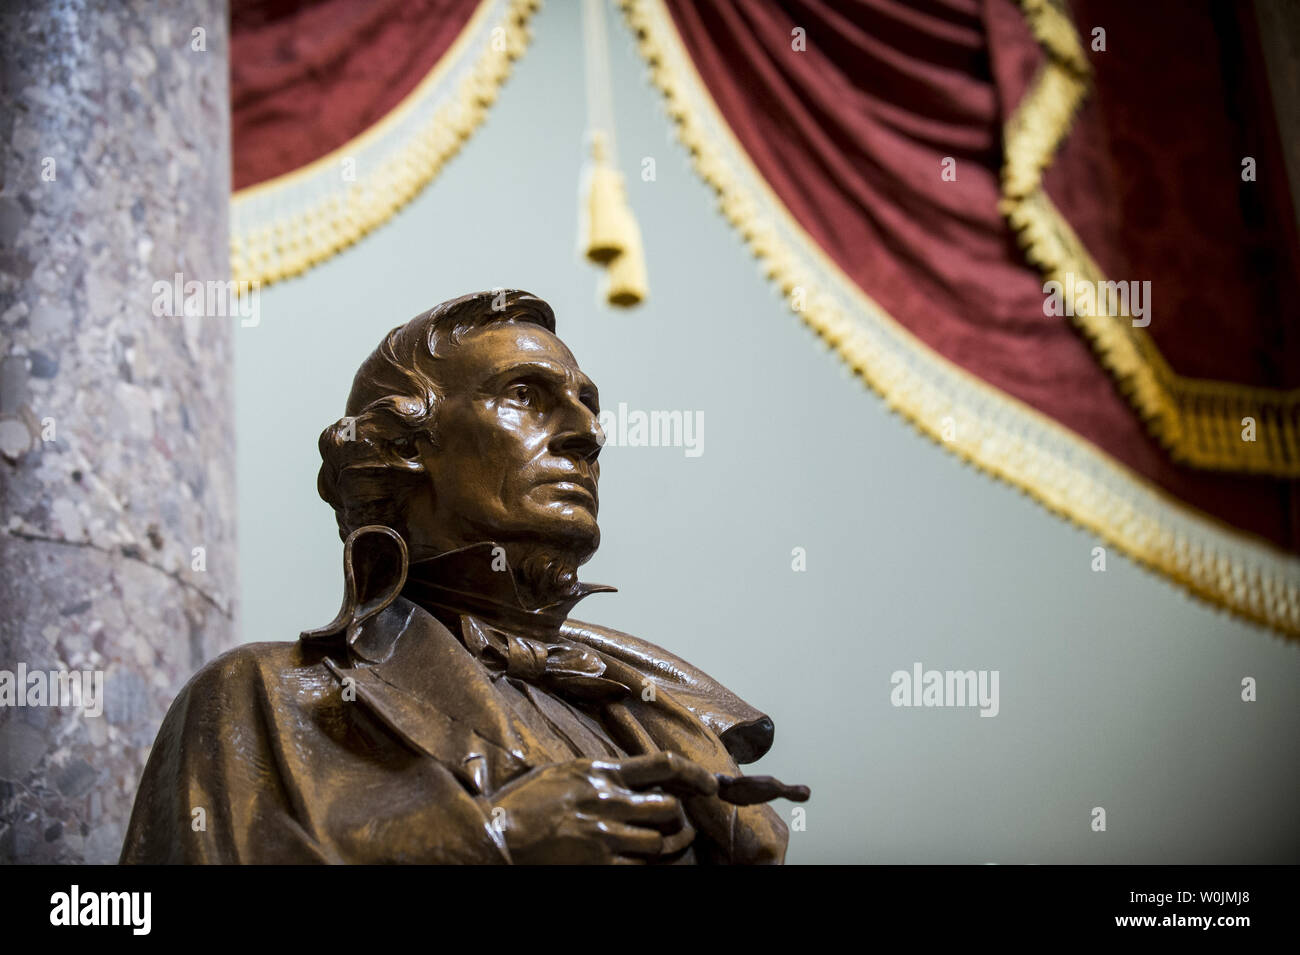 Statue of Jefferson Davis, president of the Confederacy  during the Civil War, stands in Statuary Hall in the United States Capitol on August 17, 2017 in Washington, DC, A nationwide debate is underway concerning the removal of statues, monuments and historical markers that memorialize the Confederacy.   Photo by Pete Marovich/UPI Stock Photo